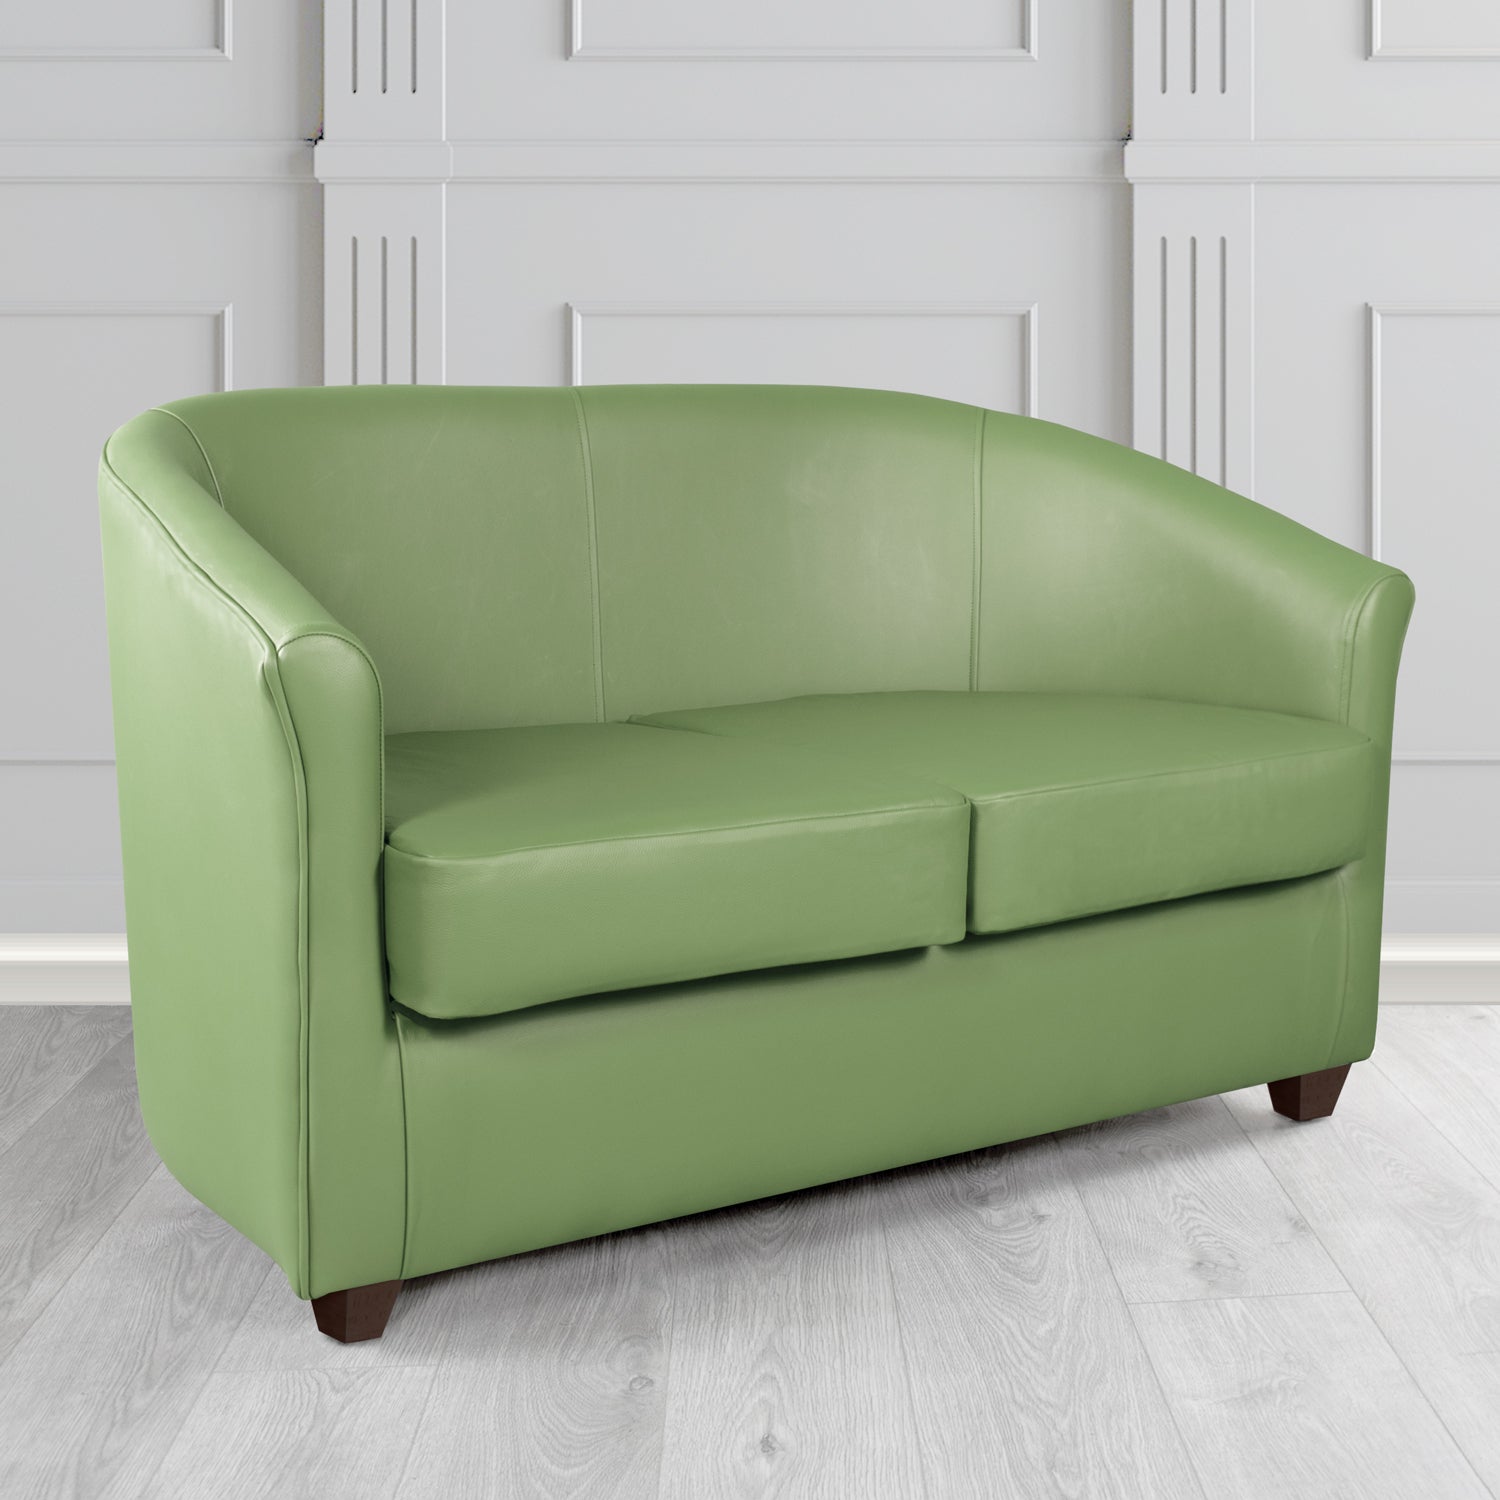 Cannes 2 Seater Tub Sofa in Just Colour Wasabi Crib 5 Faux Leather - The Tub Chair Shop